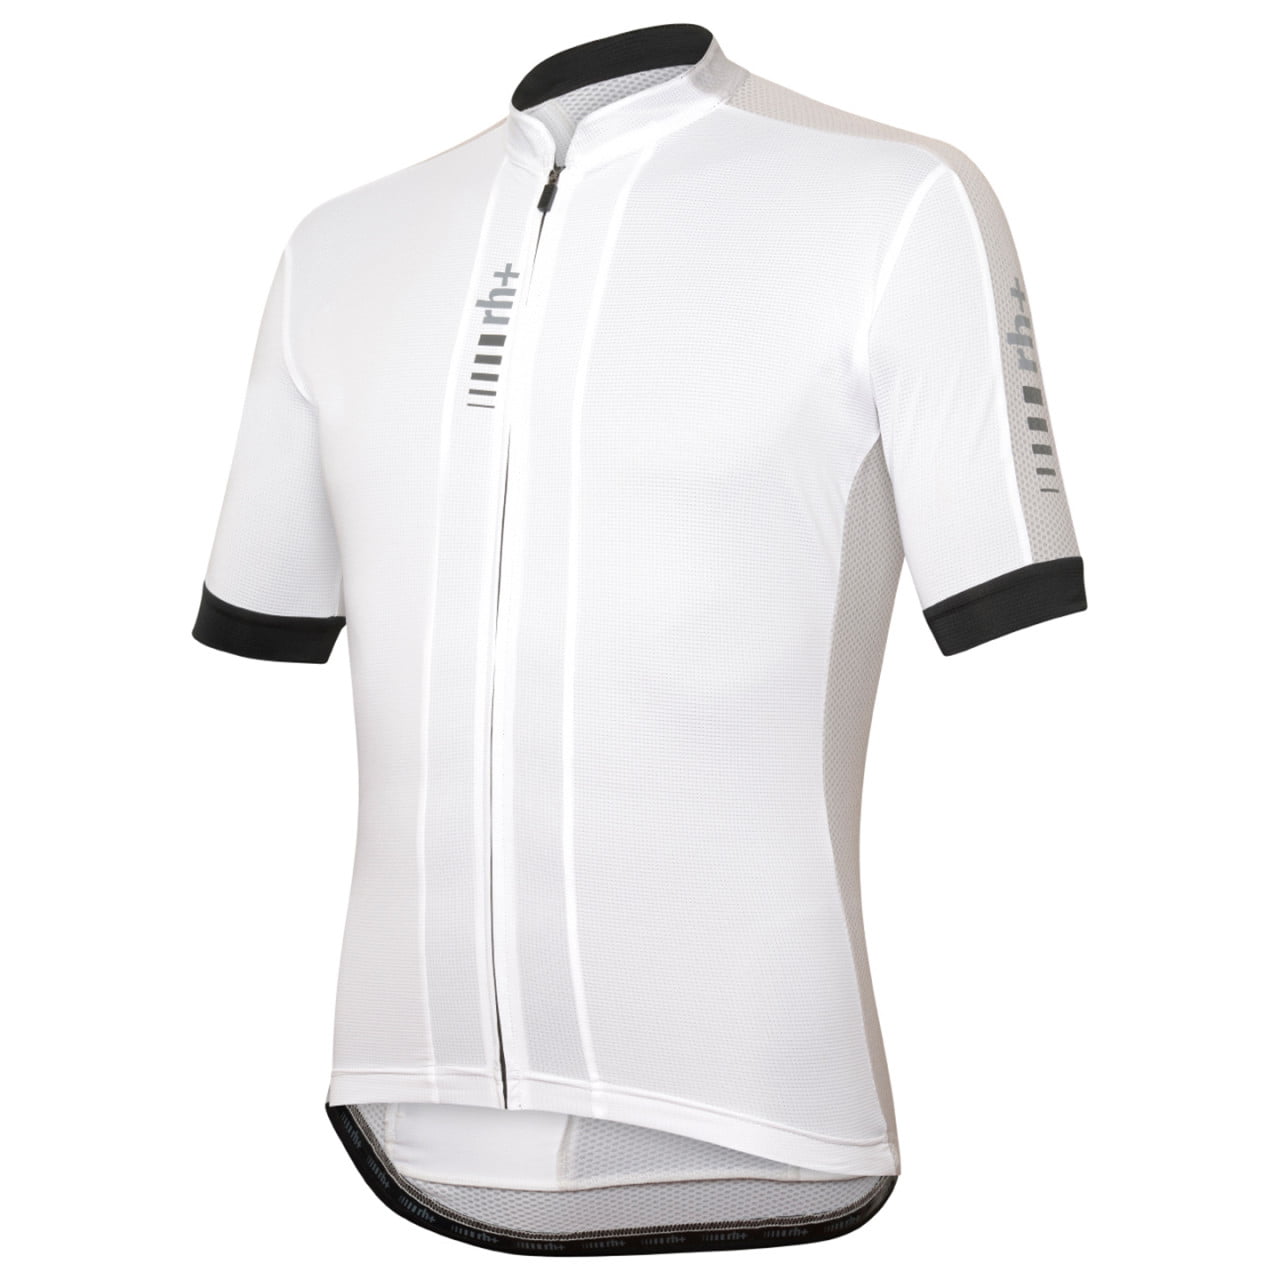 New Primo Short Sleeve Jersey